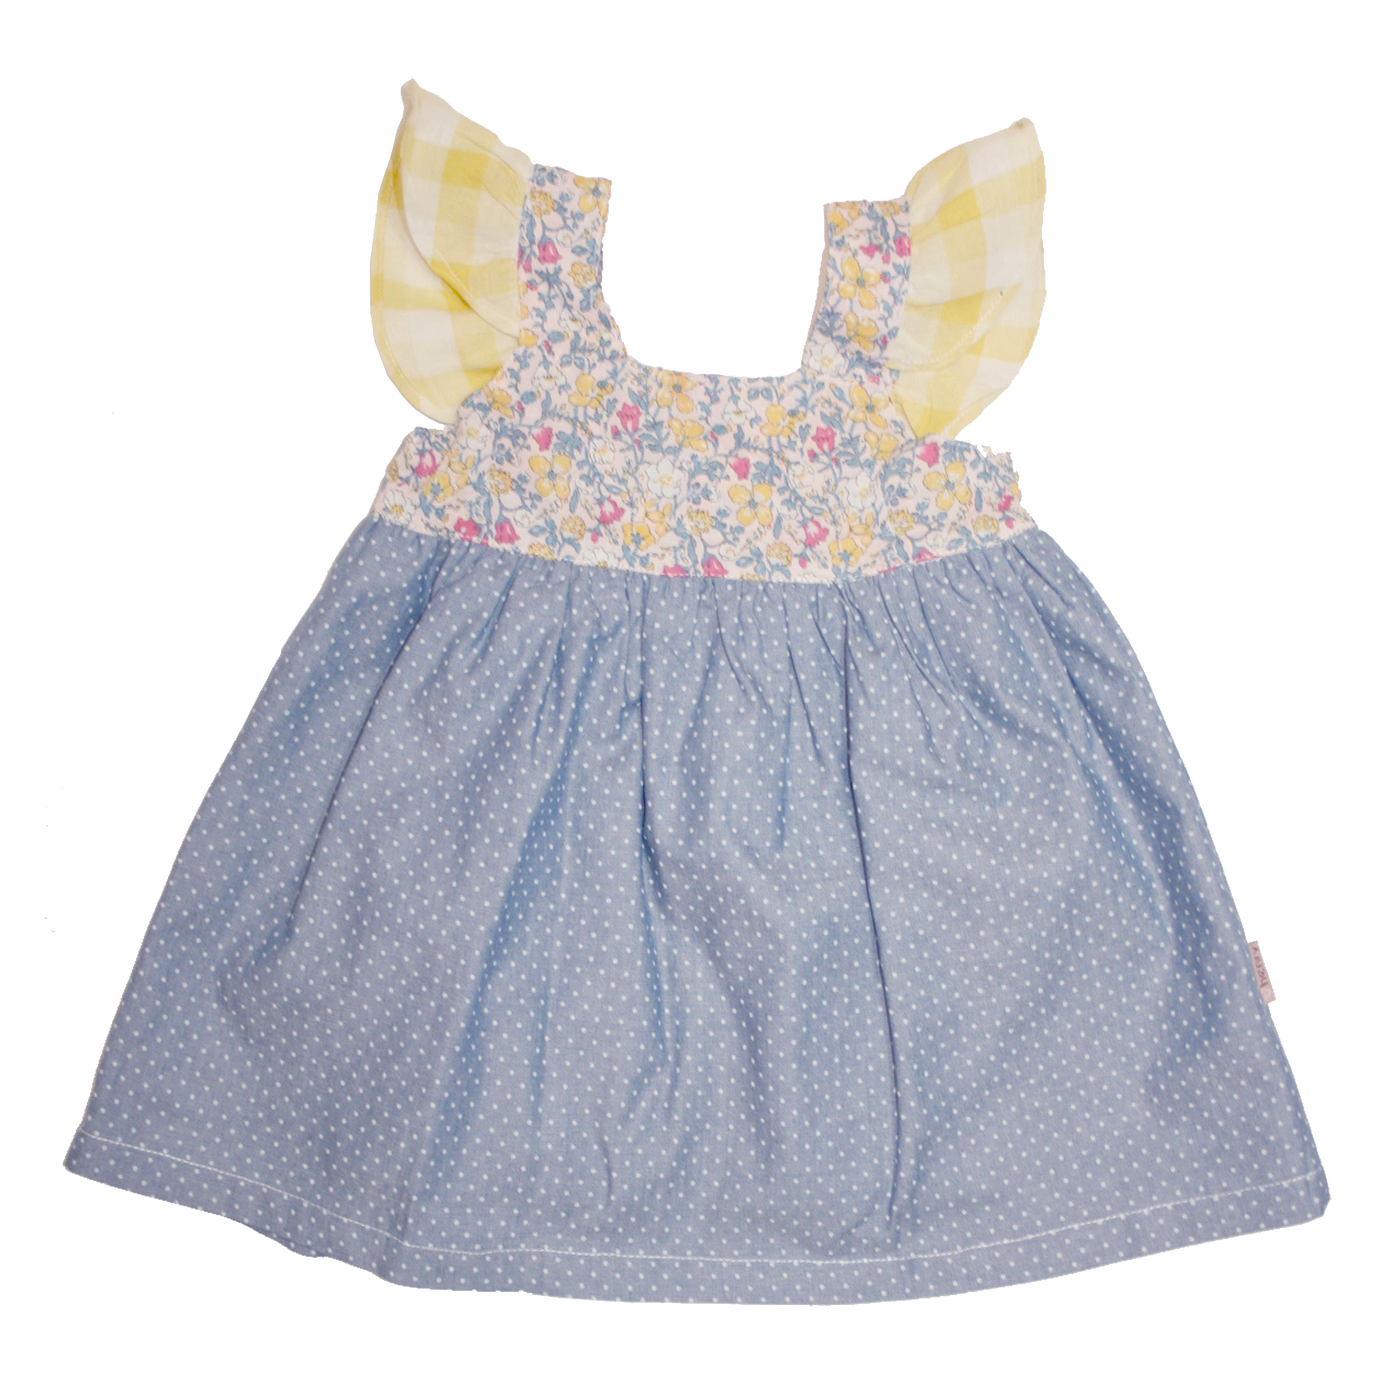 S18 LOVE HENRY - Baby Girls Pilcher floral (802025209916)